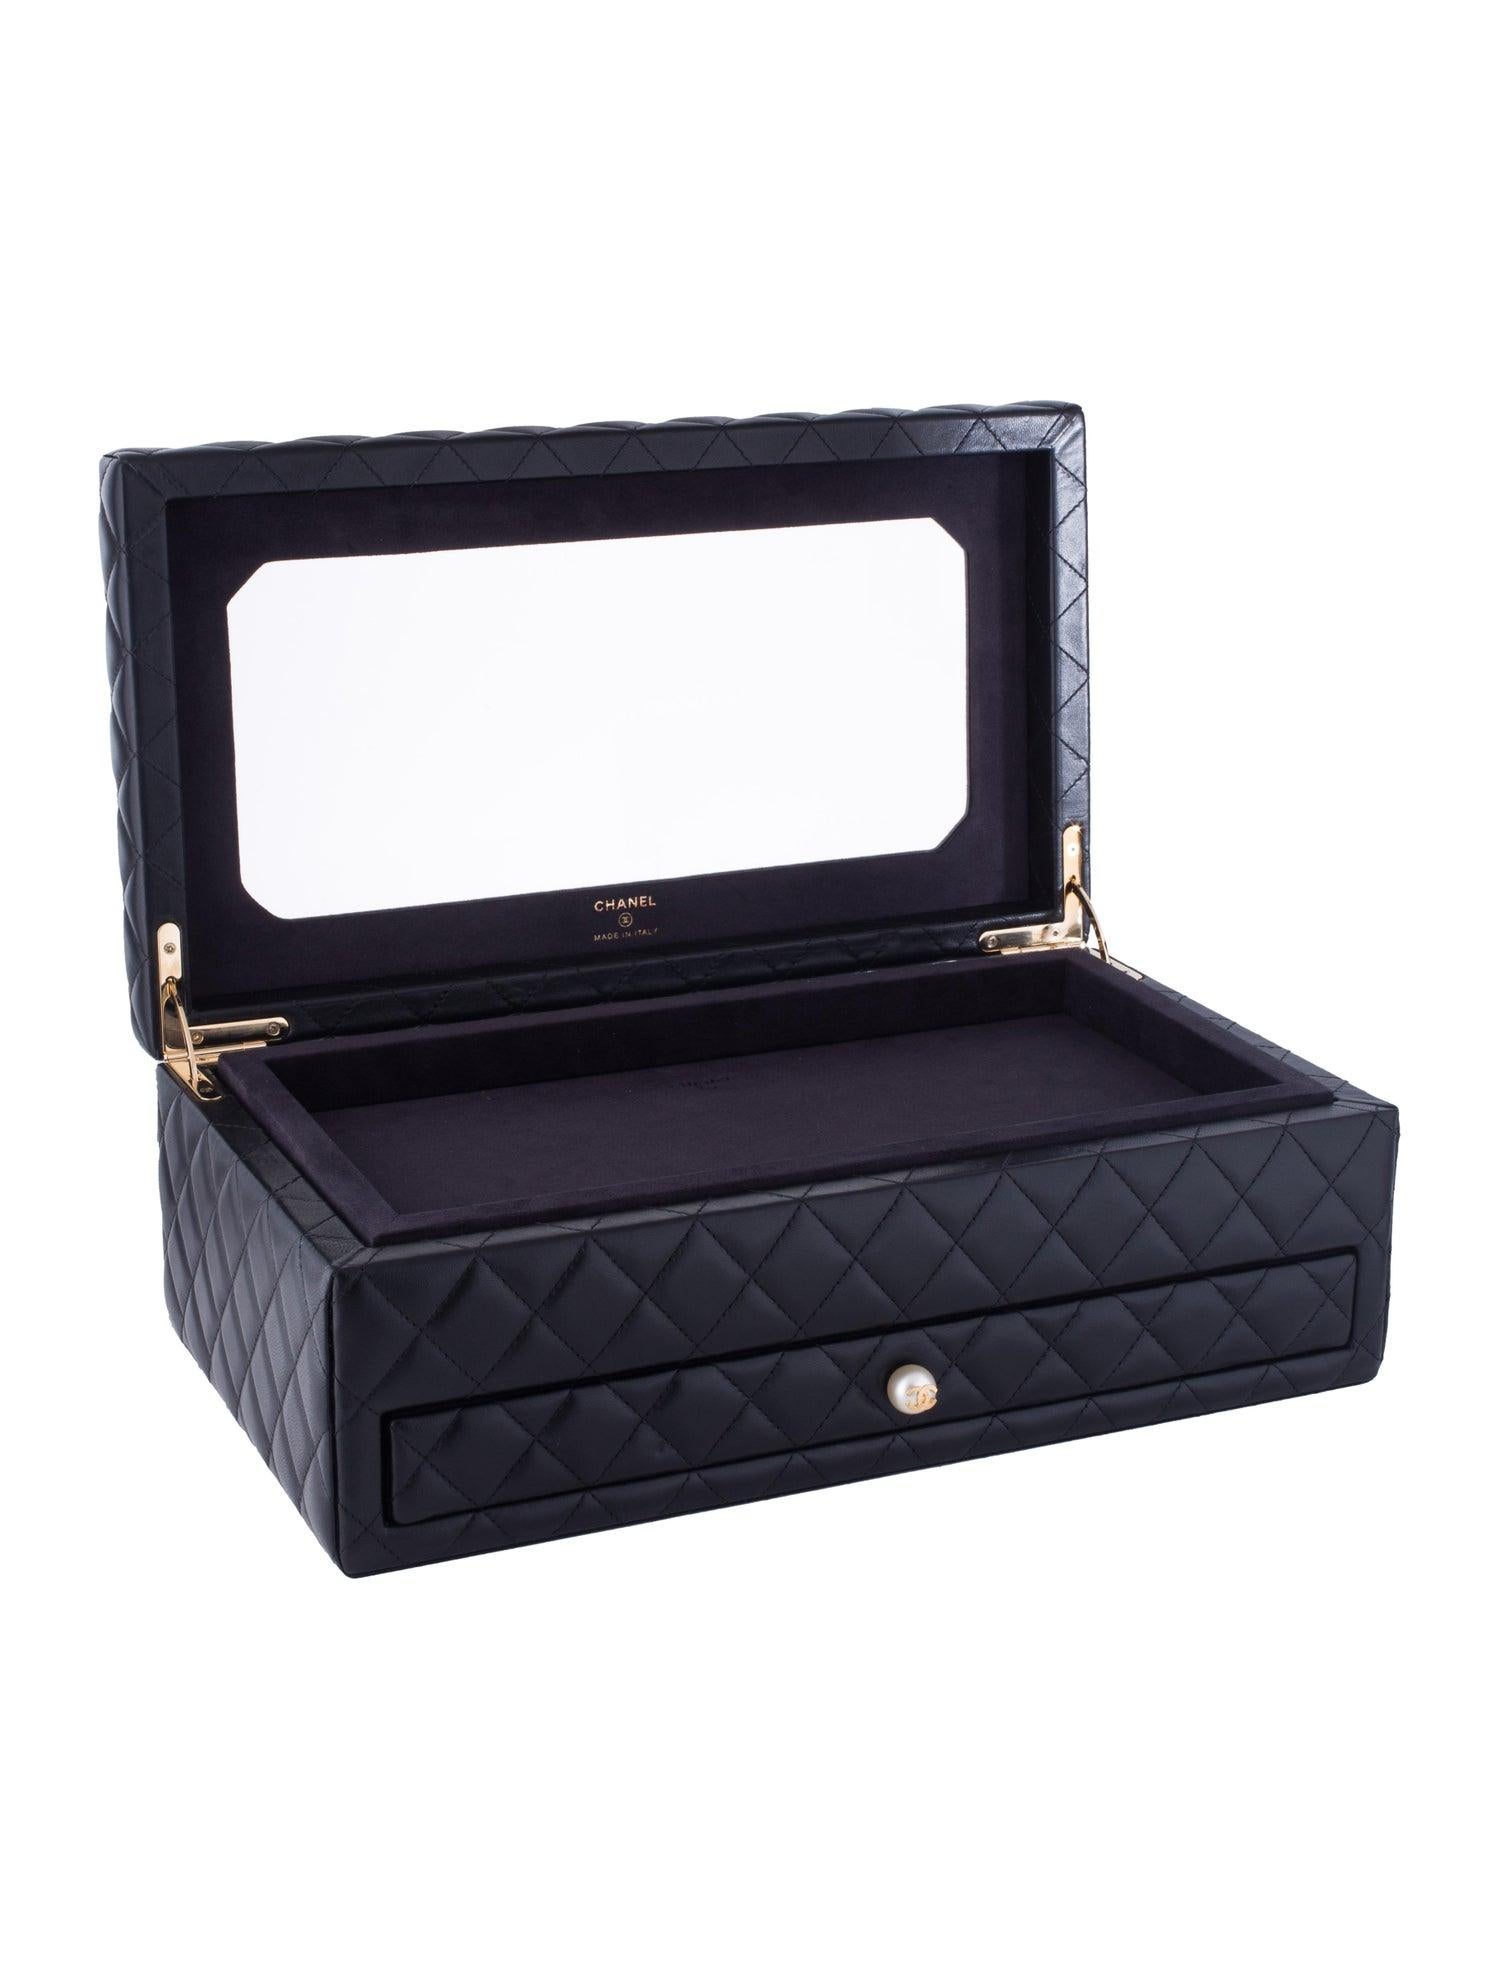 Chanel Black Leather Gold Pearl Women's Jewelry Drawer Vanity Storage Case Box

Lambskin leather
Faux pearl
Gold tone hardware
Features removable top tray and sliding drawer with 12 compartments 
Made in Italy
Measures 13.25